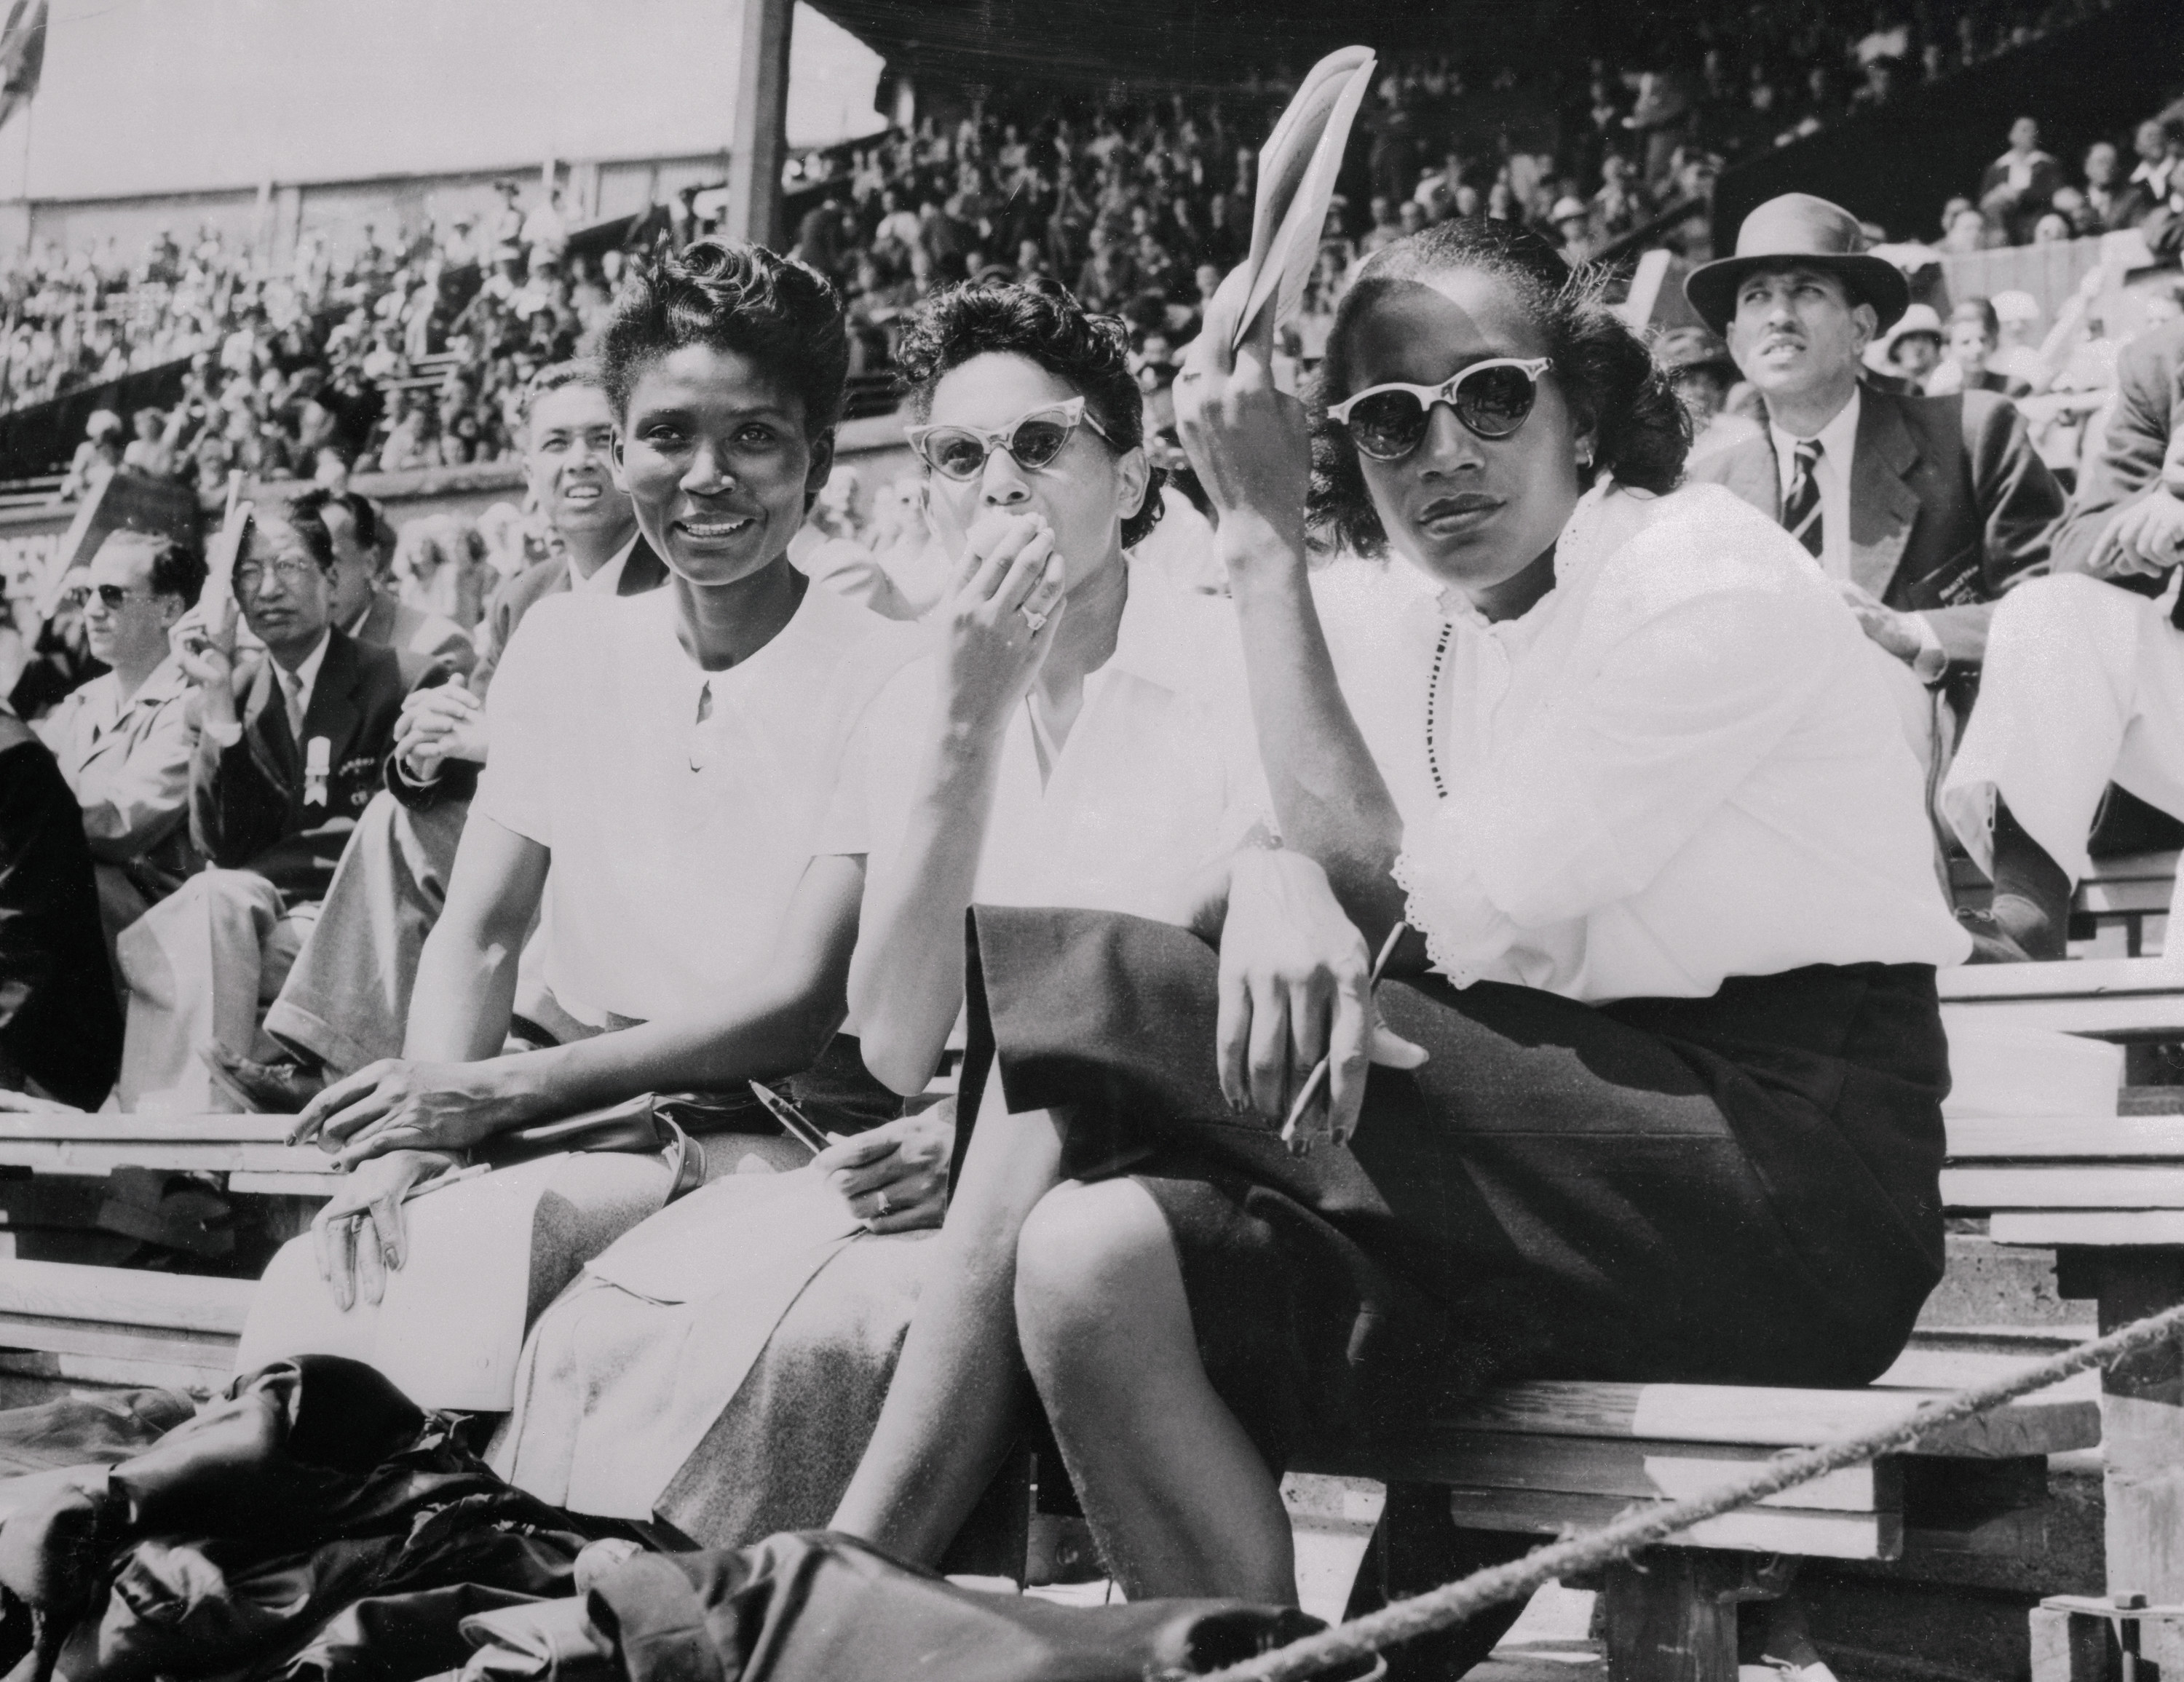 Audrey Patterson, Alice Coachman and another woman sit with the spectators at the 1948 Olympics